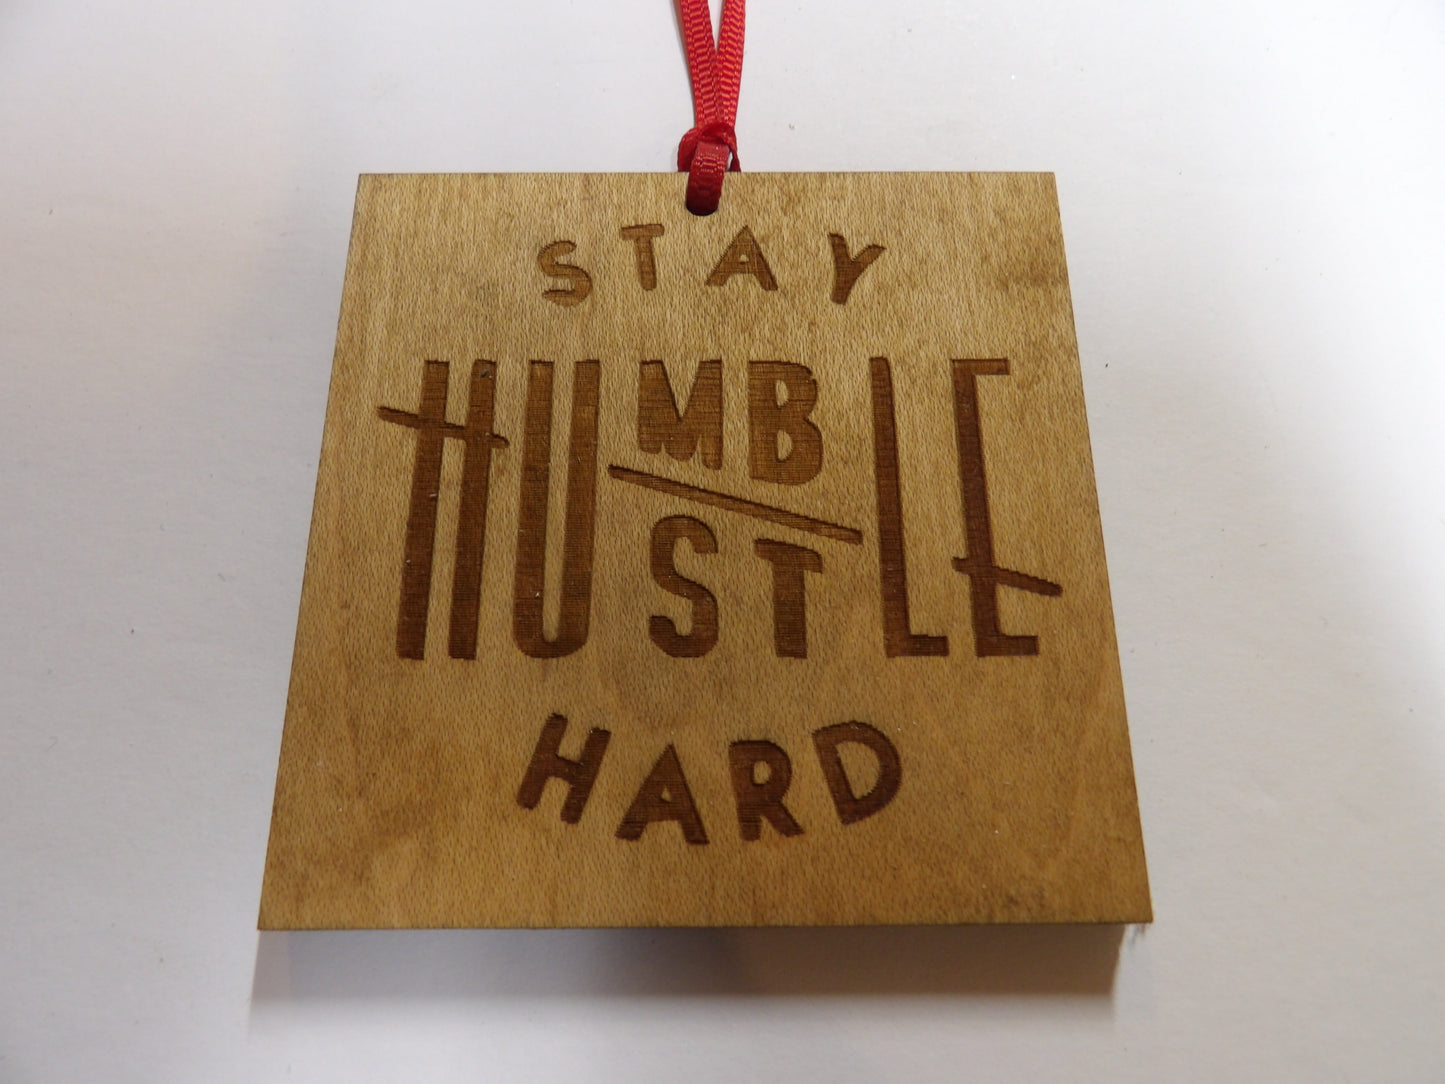 Stay Humble Hustle Hard Wooden Christmas Tree Ornament